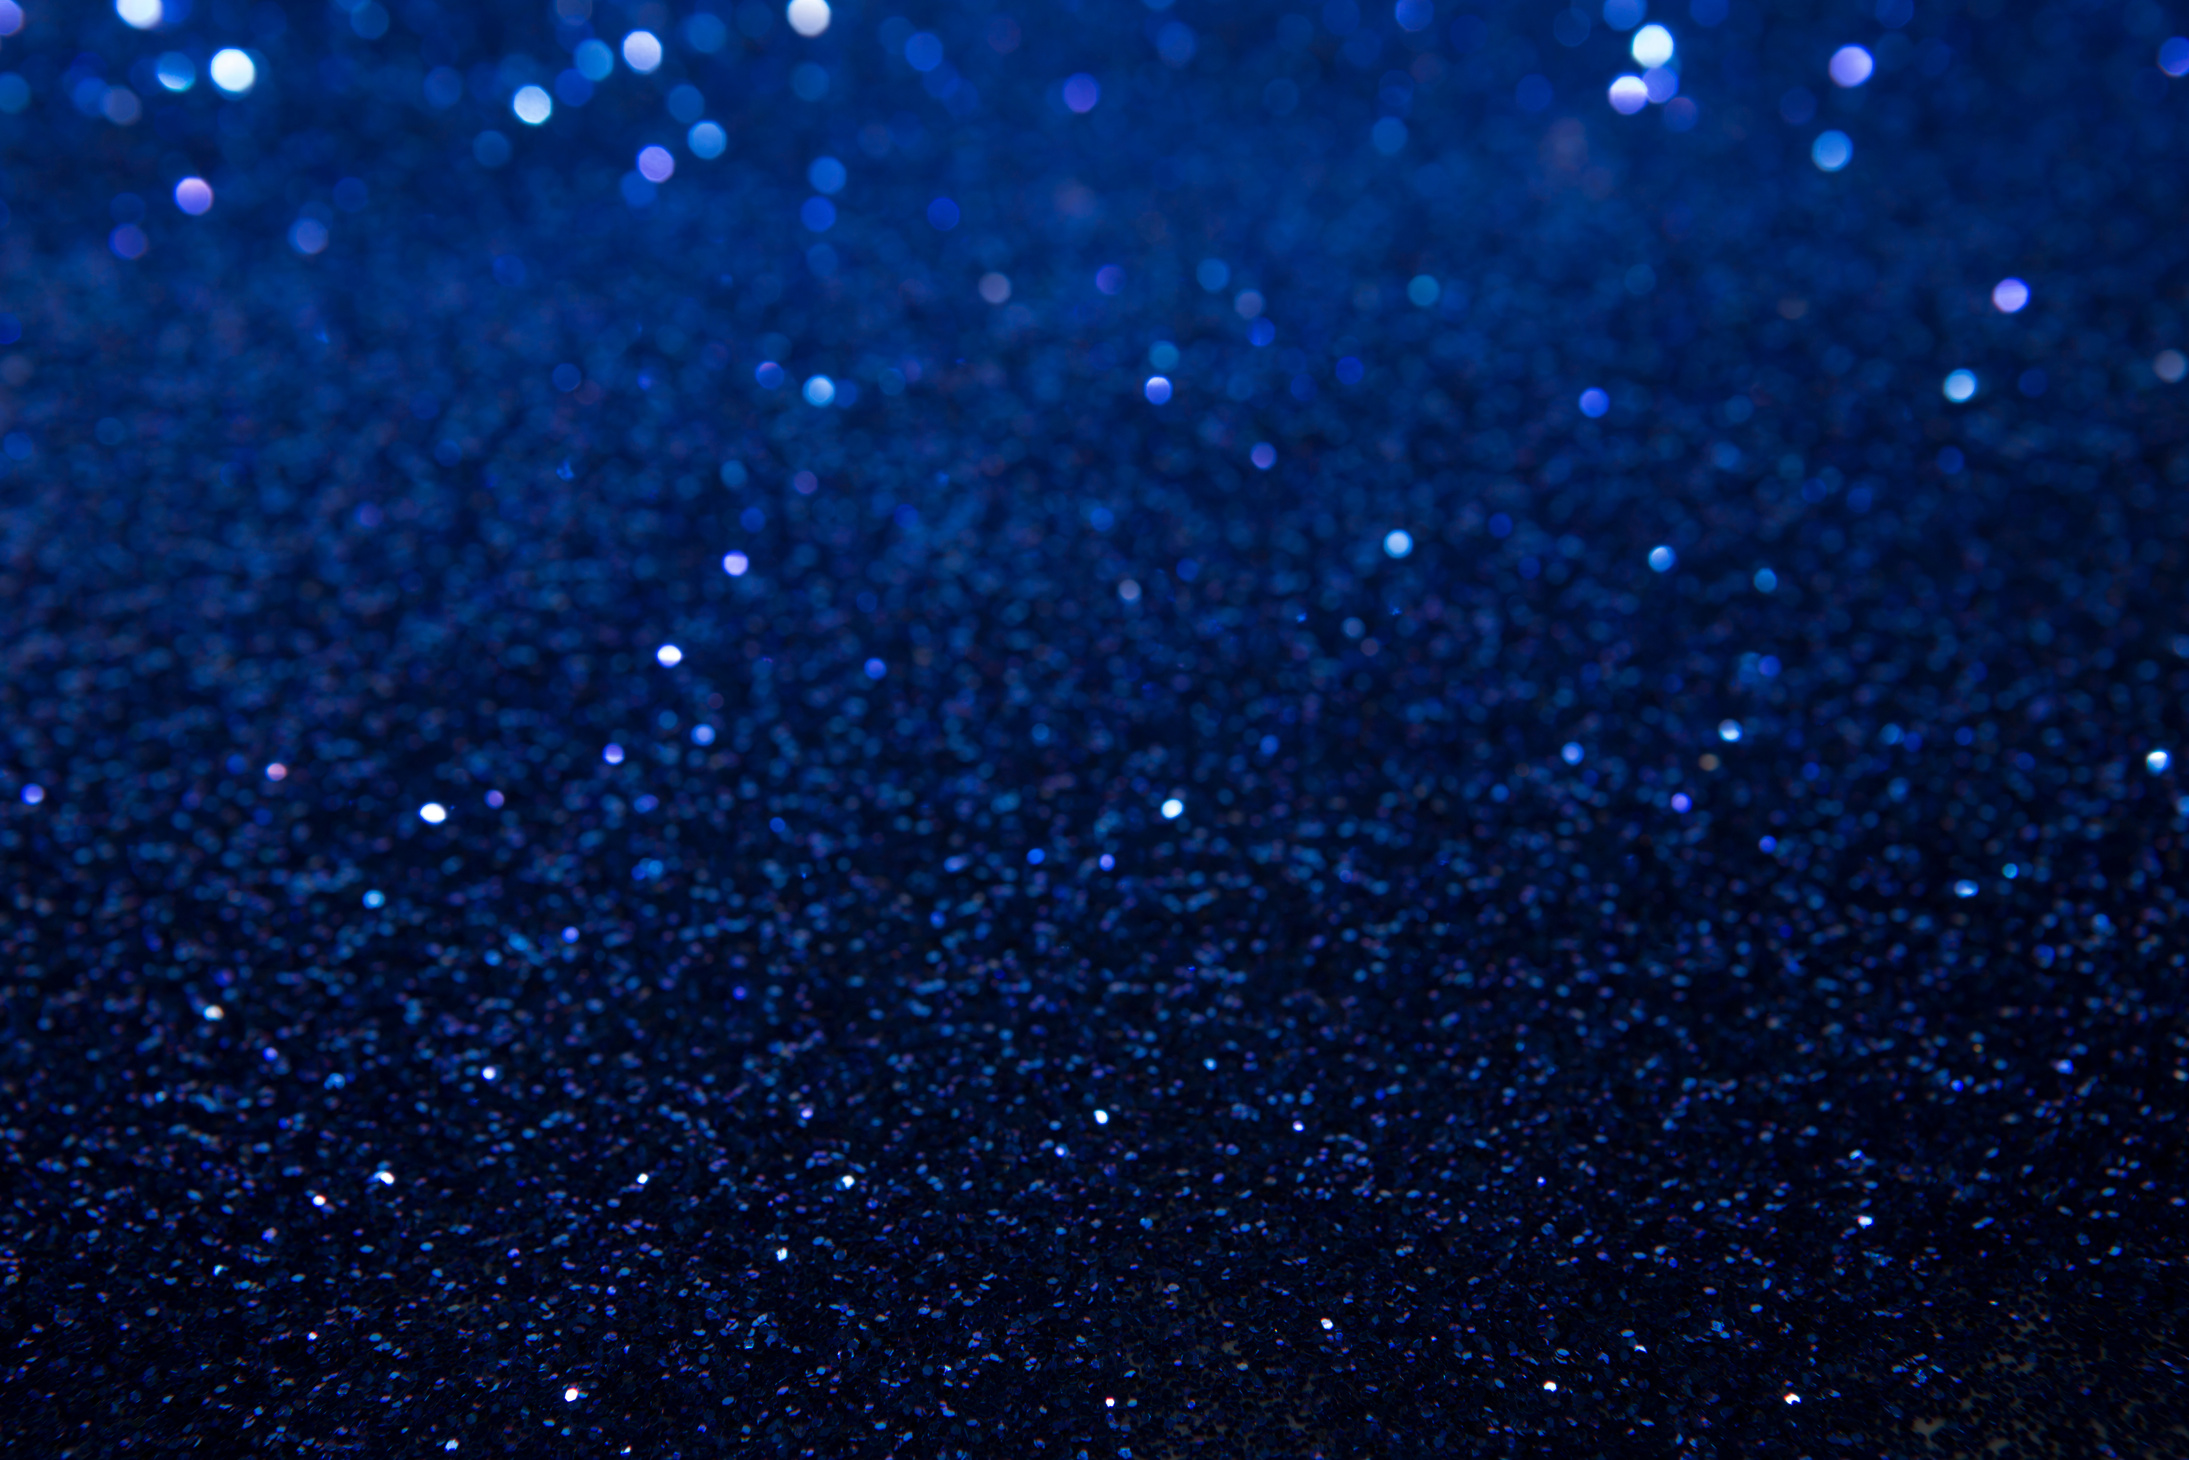 Abstract blue sparkle glitter background